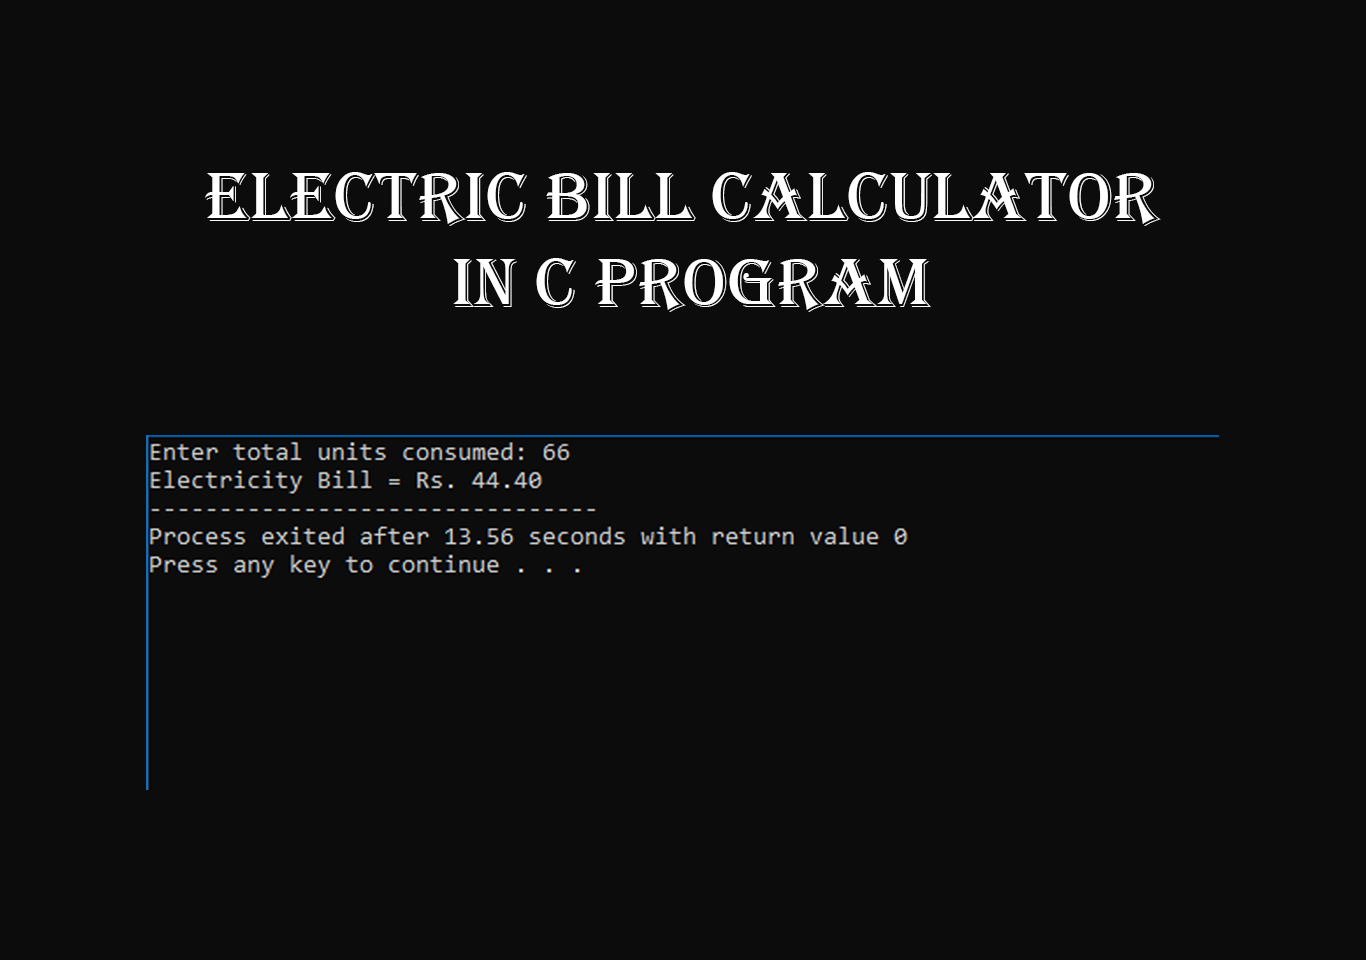 Electric bill calculator in C with source code